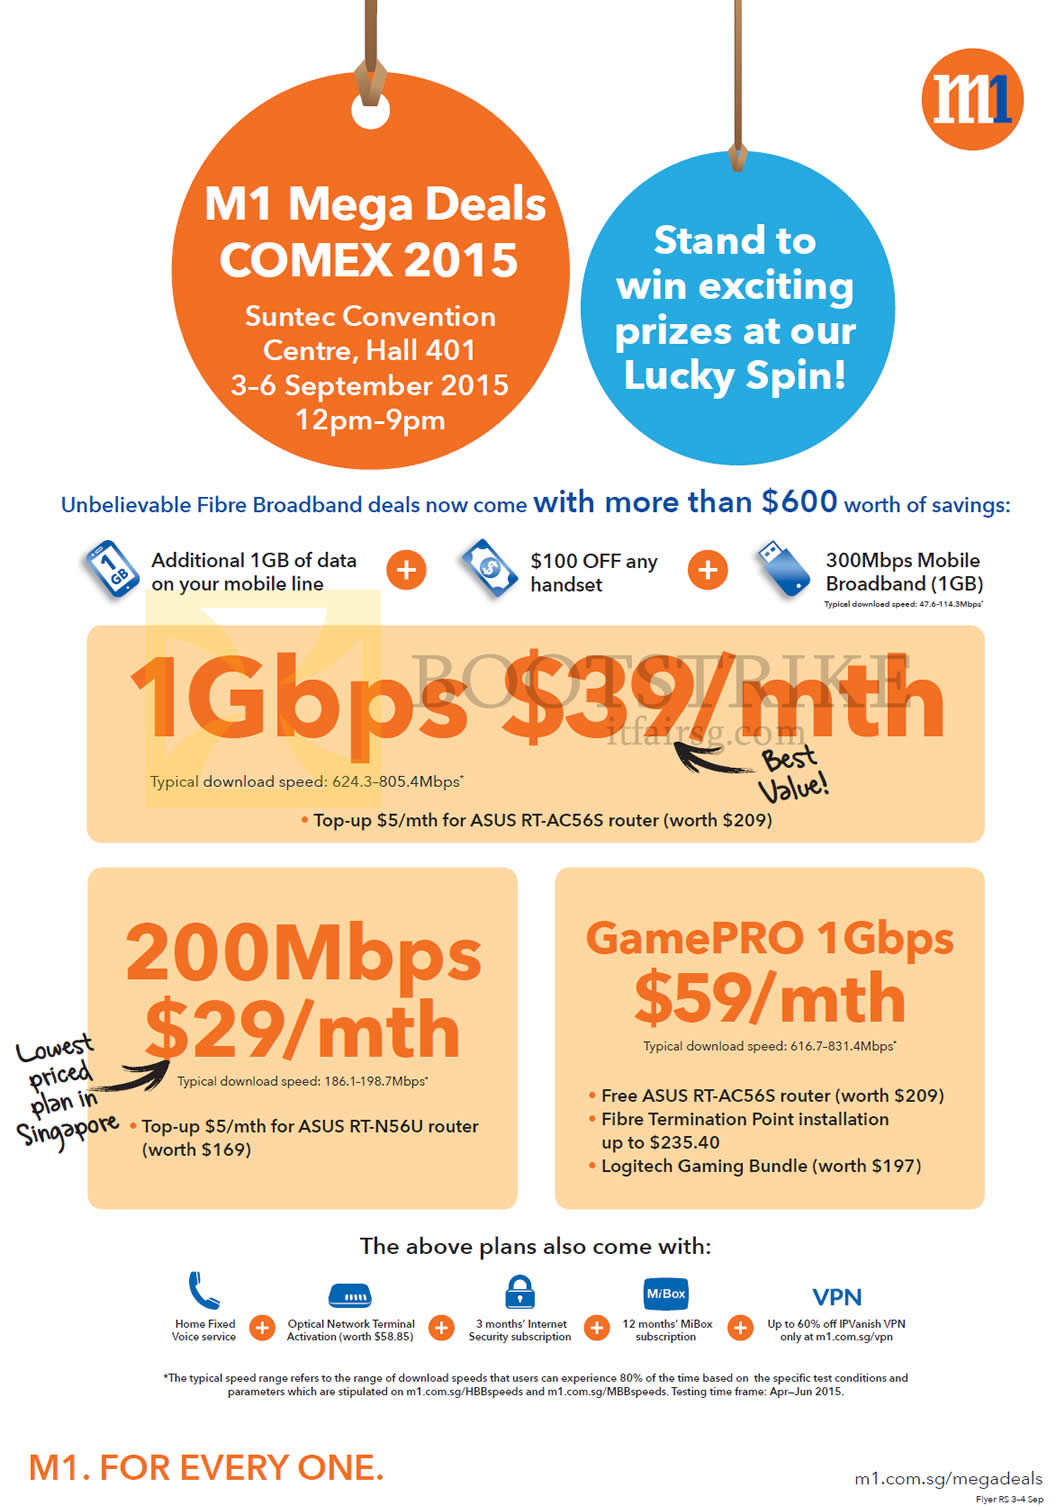 COMEX 2015 price list image brochure of M1 1Gbps 39 Mth, 200Mbps 29 Mth, GamePRO 1Gbps $59 Mth